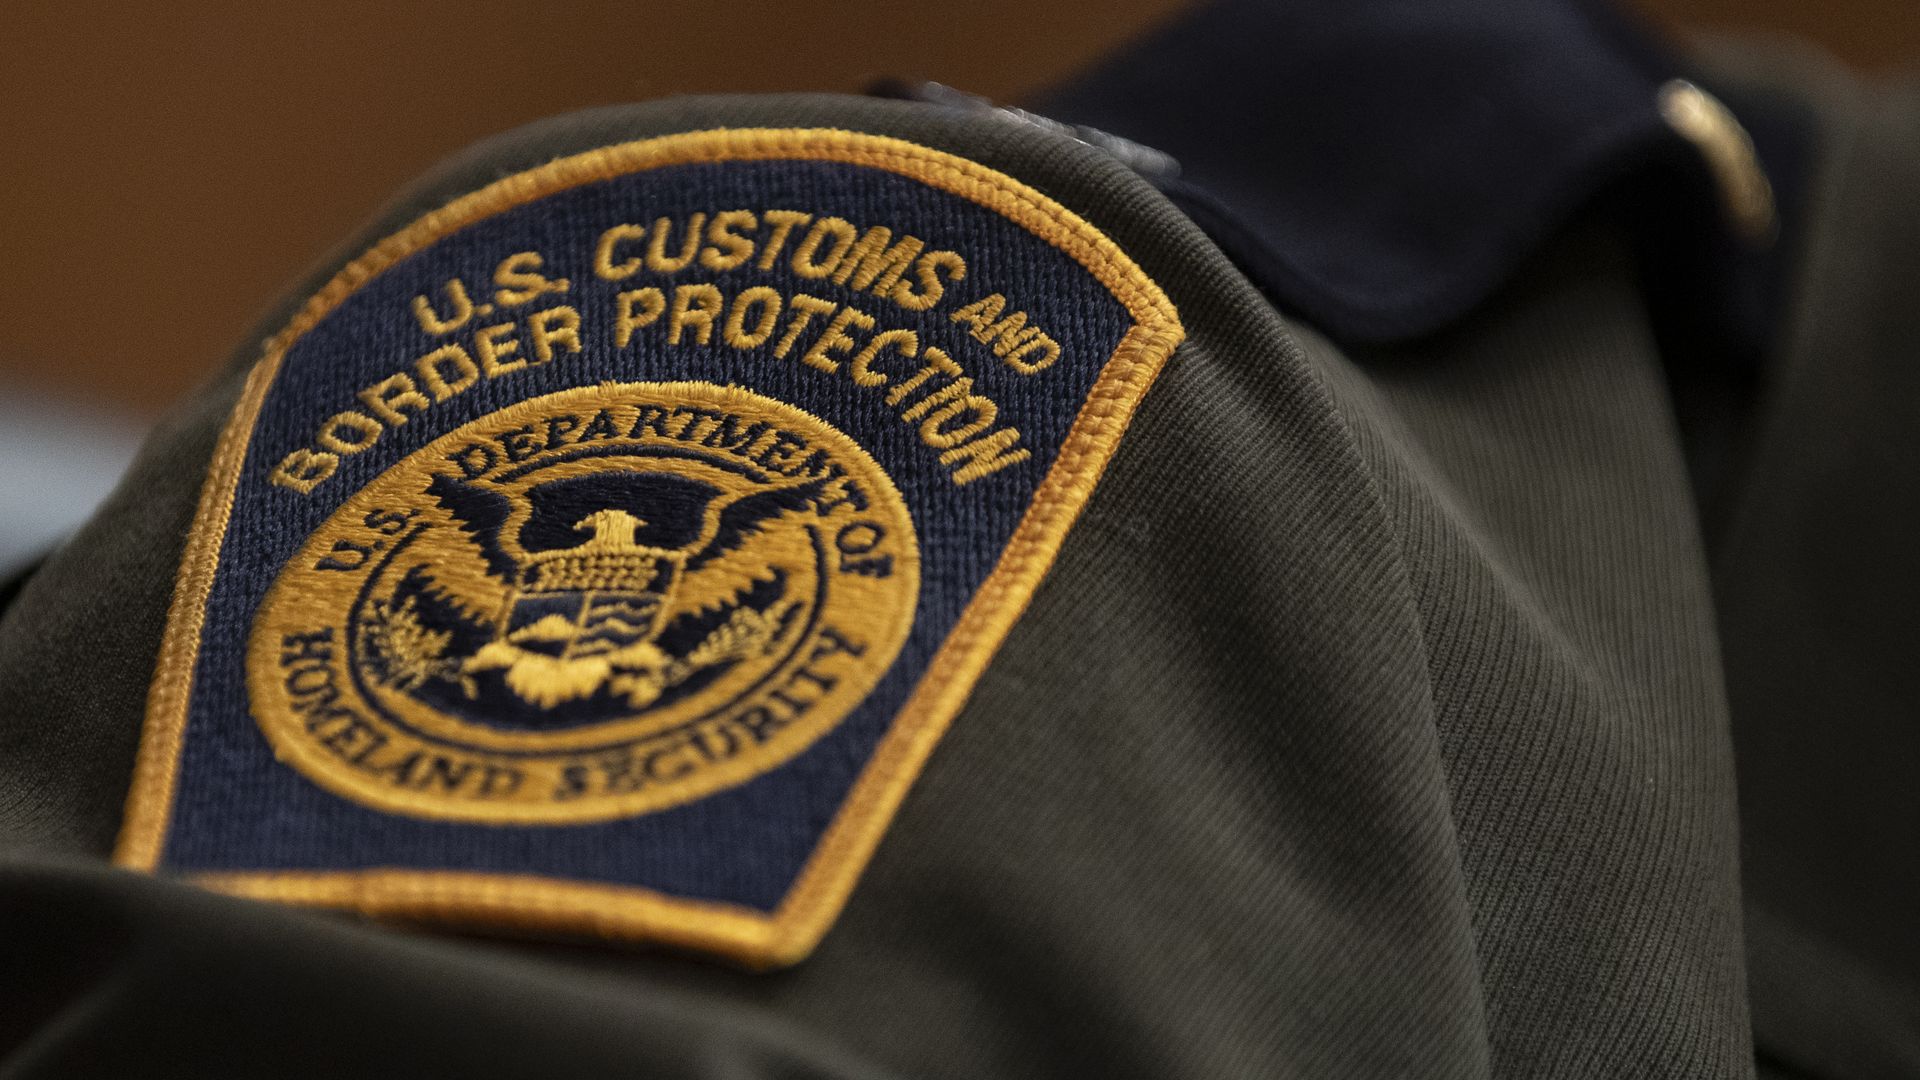 A U.S. Customs and Border Protection patch on the uniform